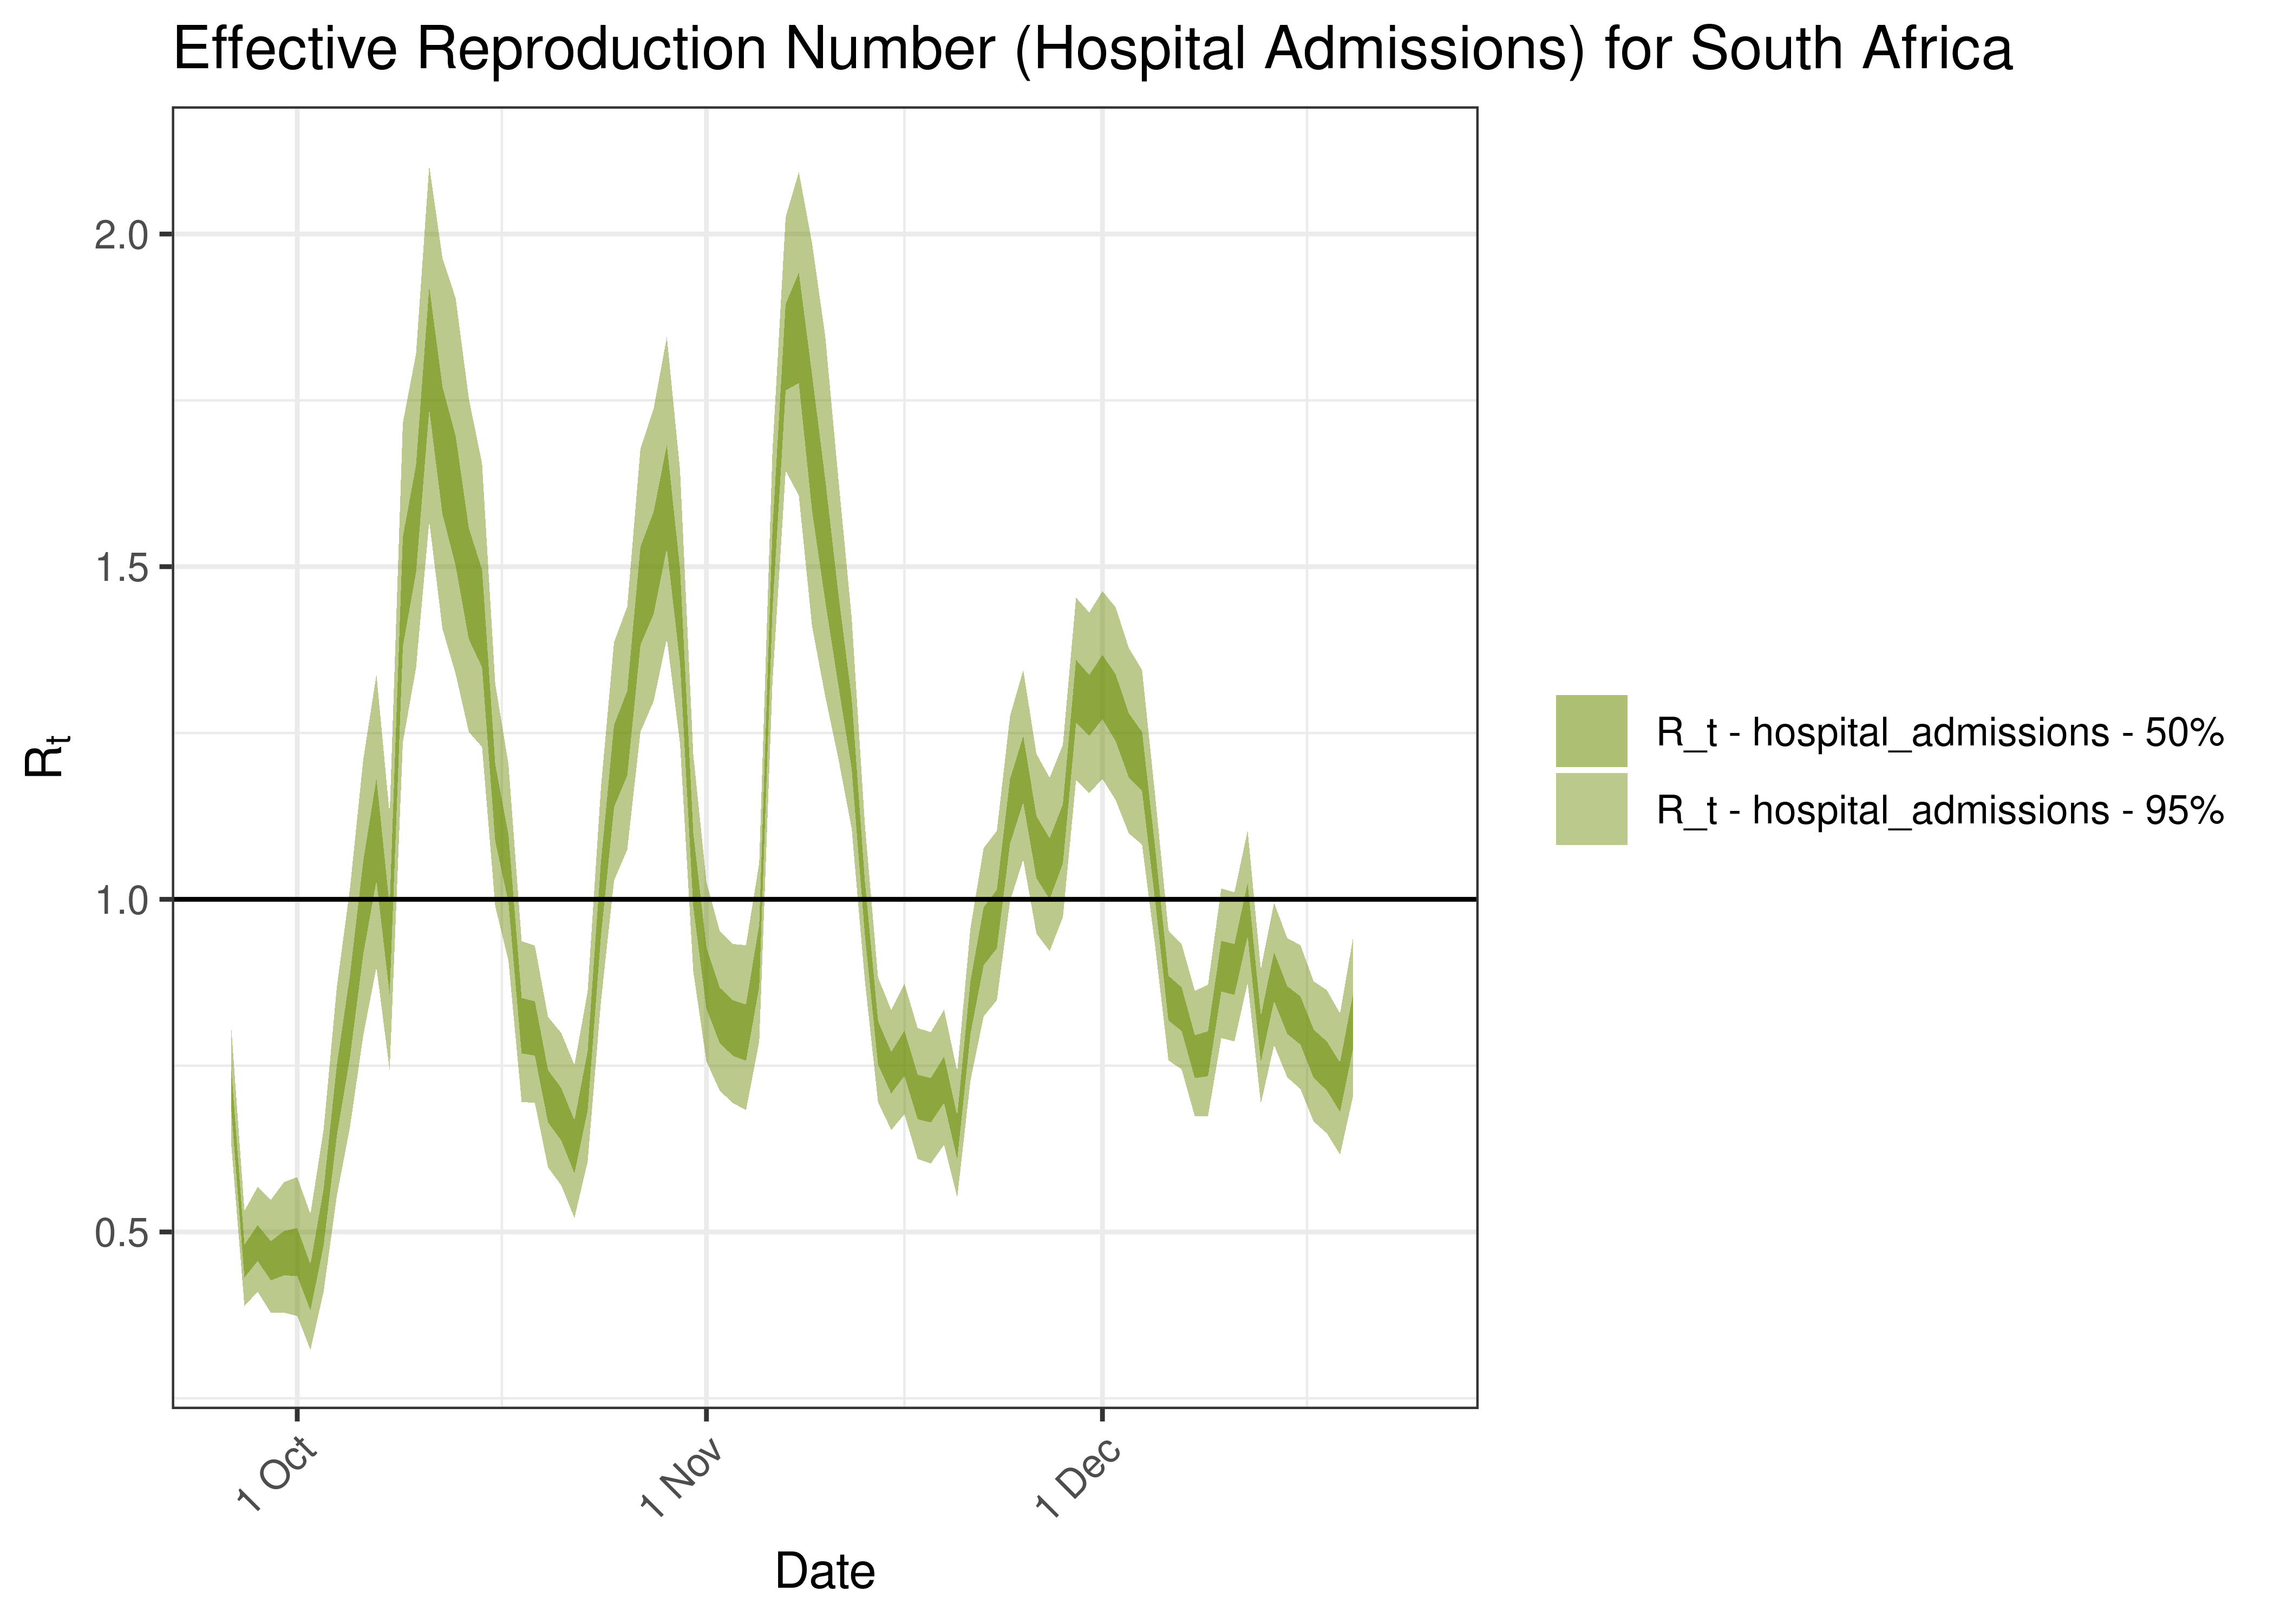 Estimated Effective Reproduction Number Based on Hospital Admissions for South Africa over last 90 days